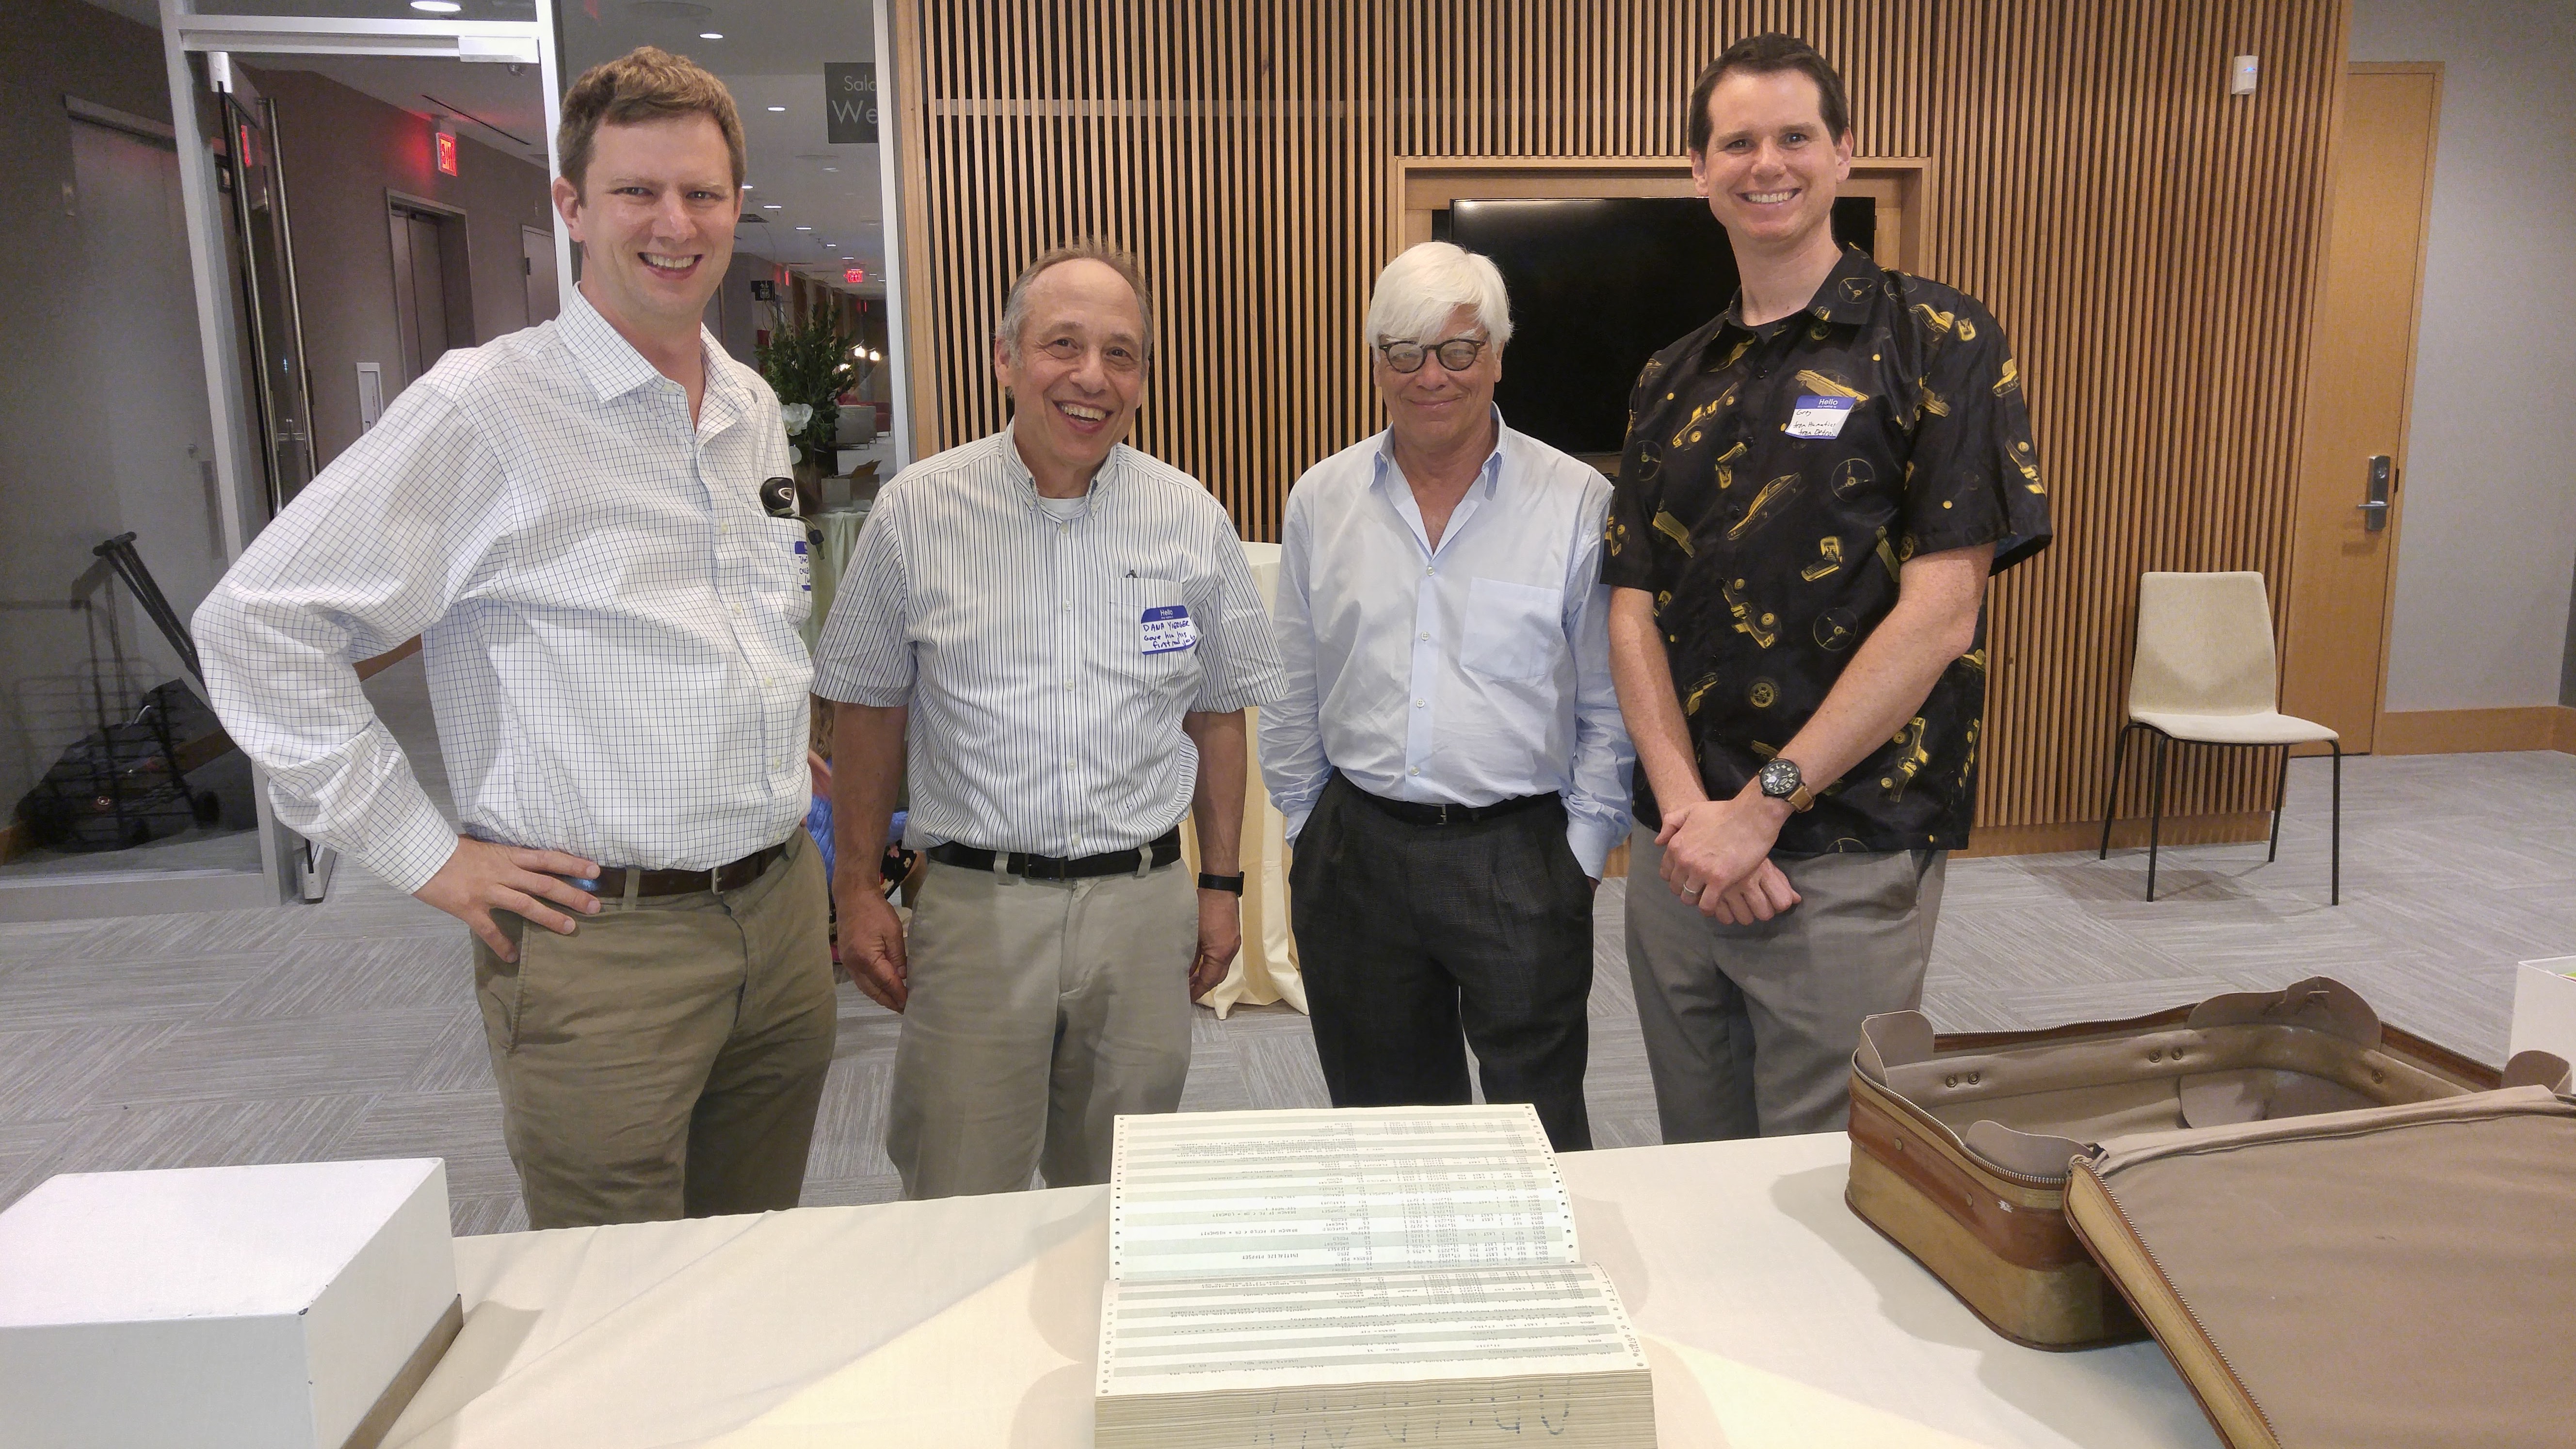 From left to right; James Kinsey, Dana Yoerger, Don Eyles, Gregory L. Charvat. In the foreground, possible the last or one of the last paper copies of the Lunar Module source code.